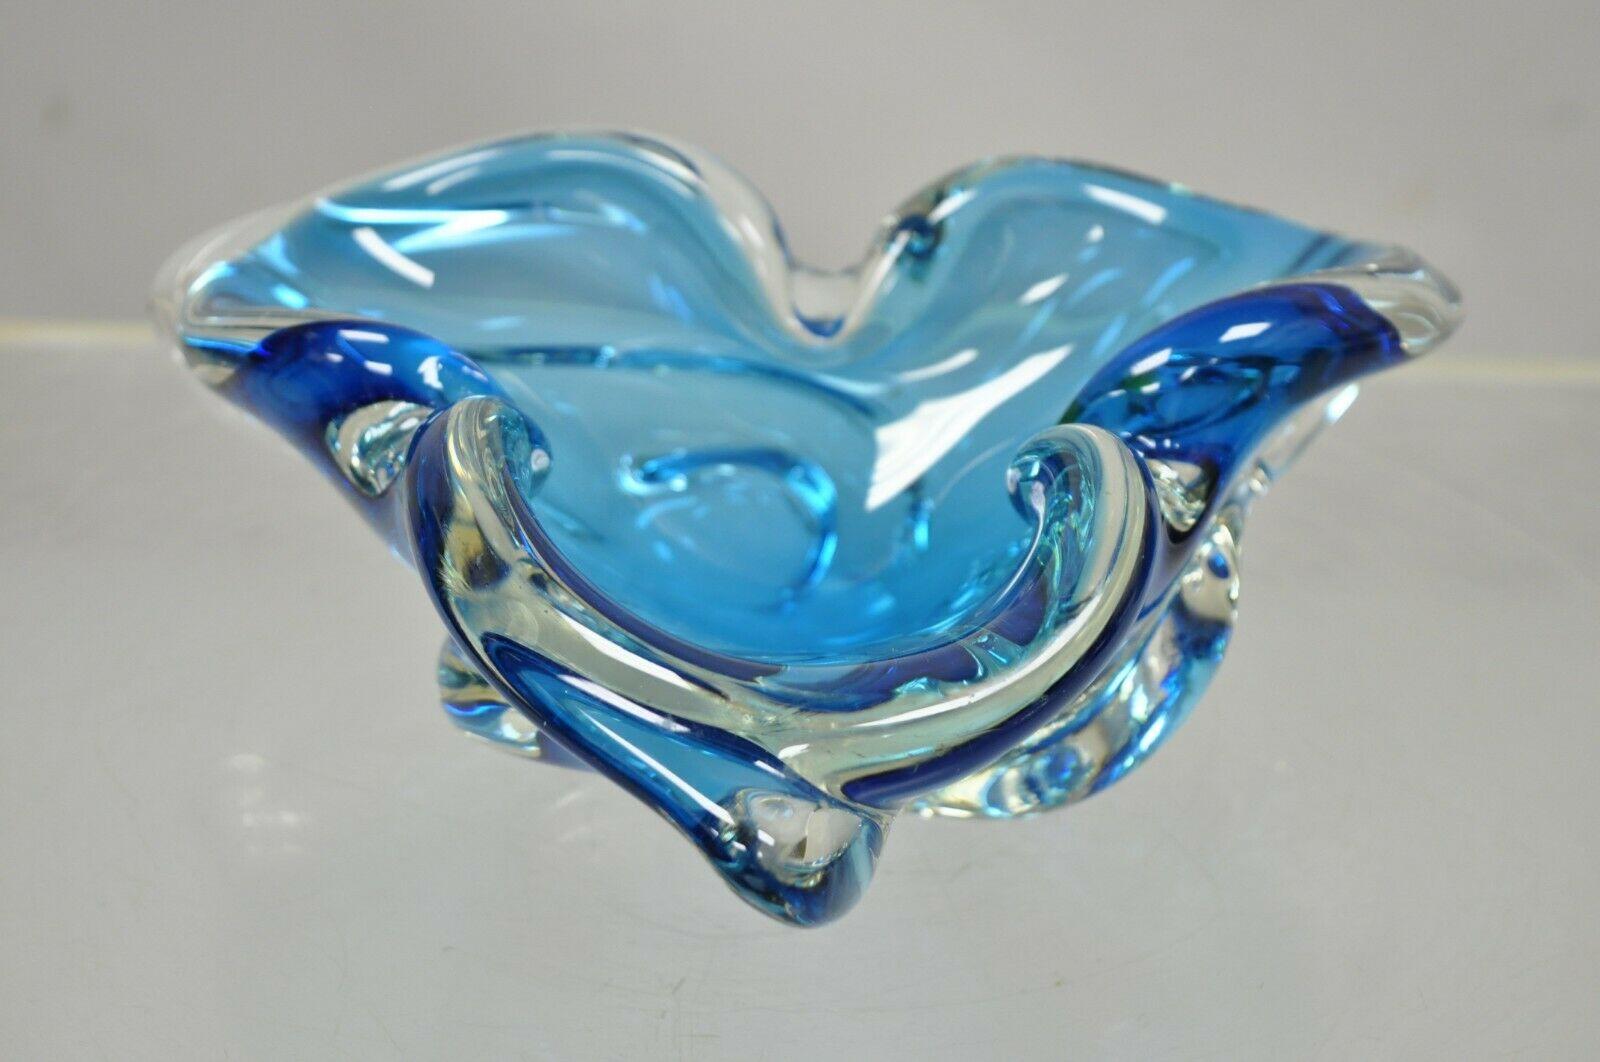 Vintage Mid-Century Modern blue blown glass trefoil murano style bowl dish/ item features thick blown glass, beautiful blue color. Great for trinkets, keys or change. Circa mid-20th century. Measurements: 3.5